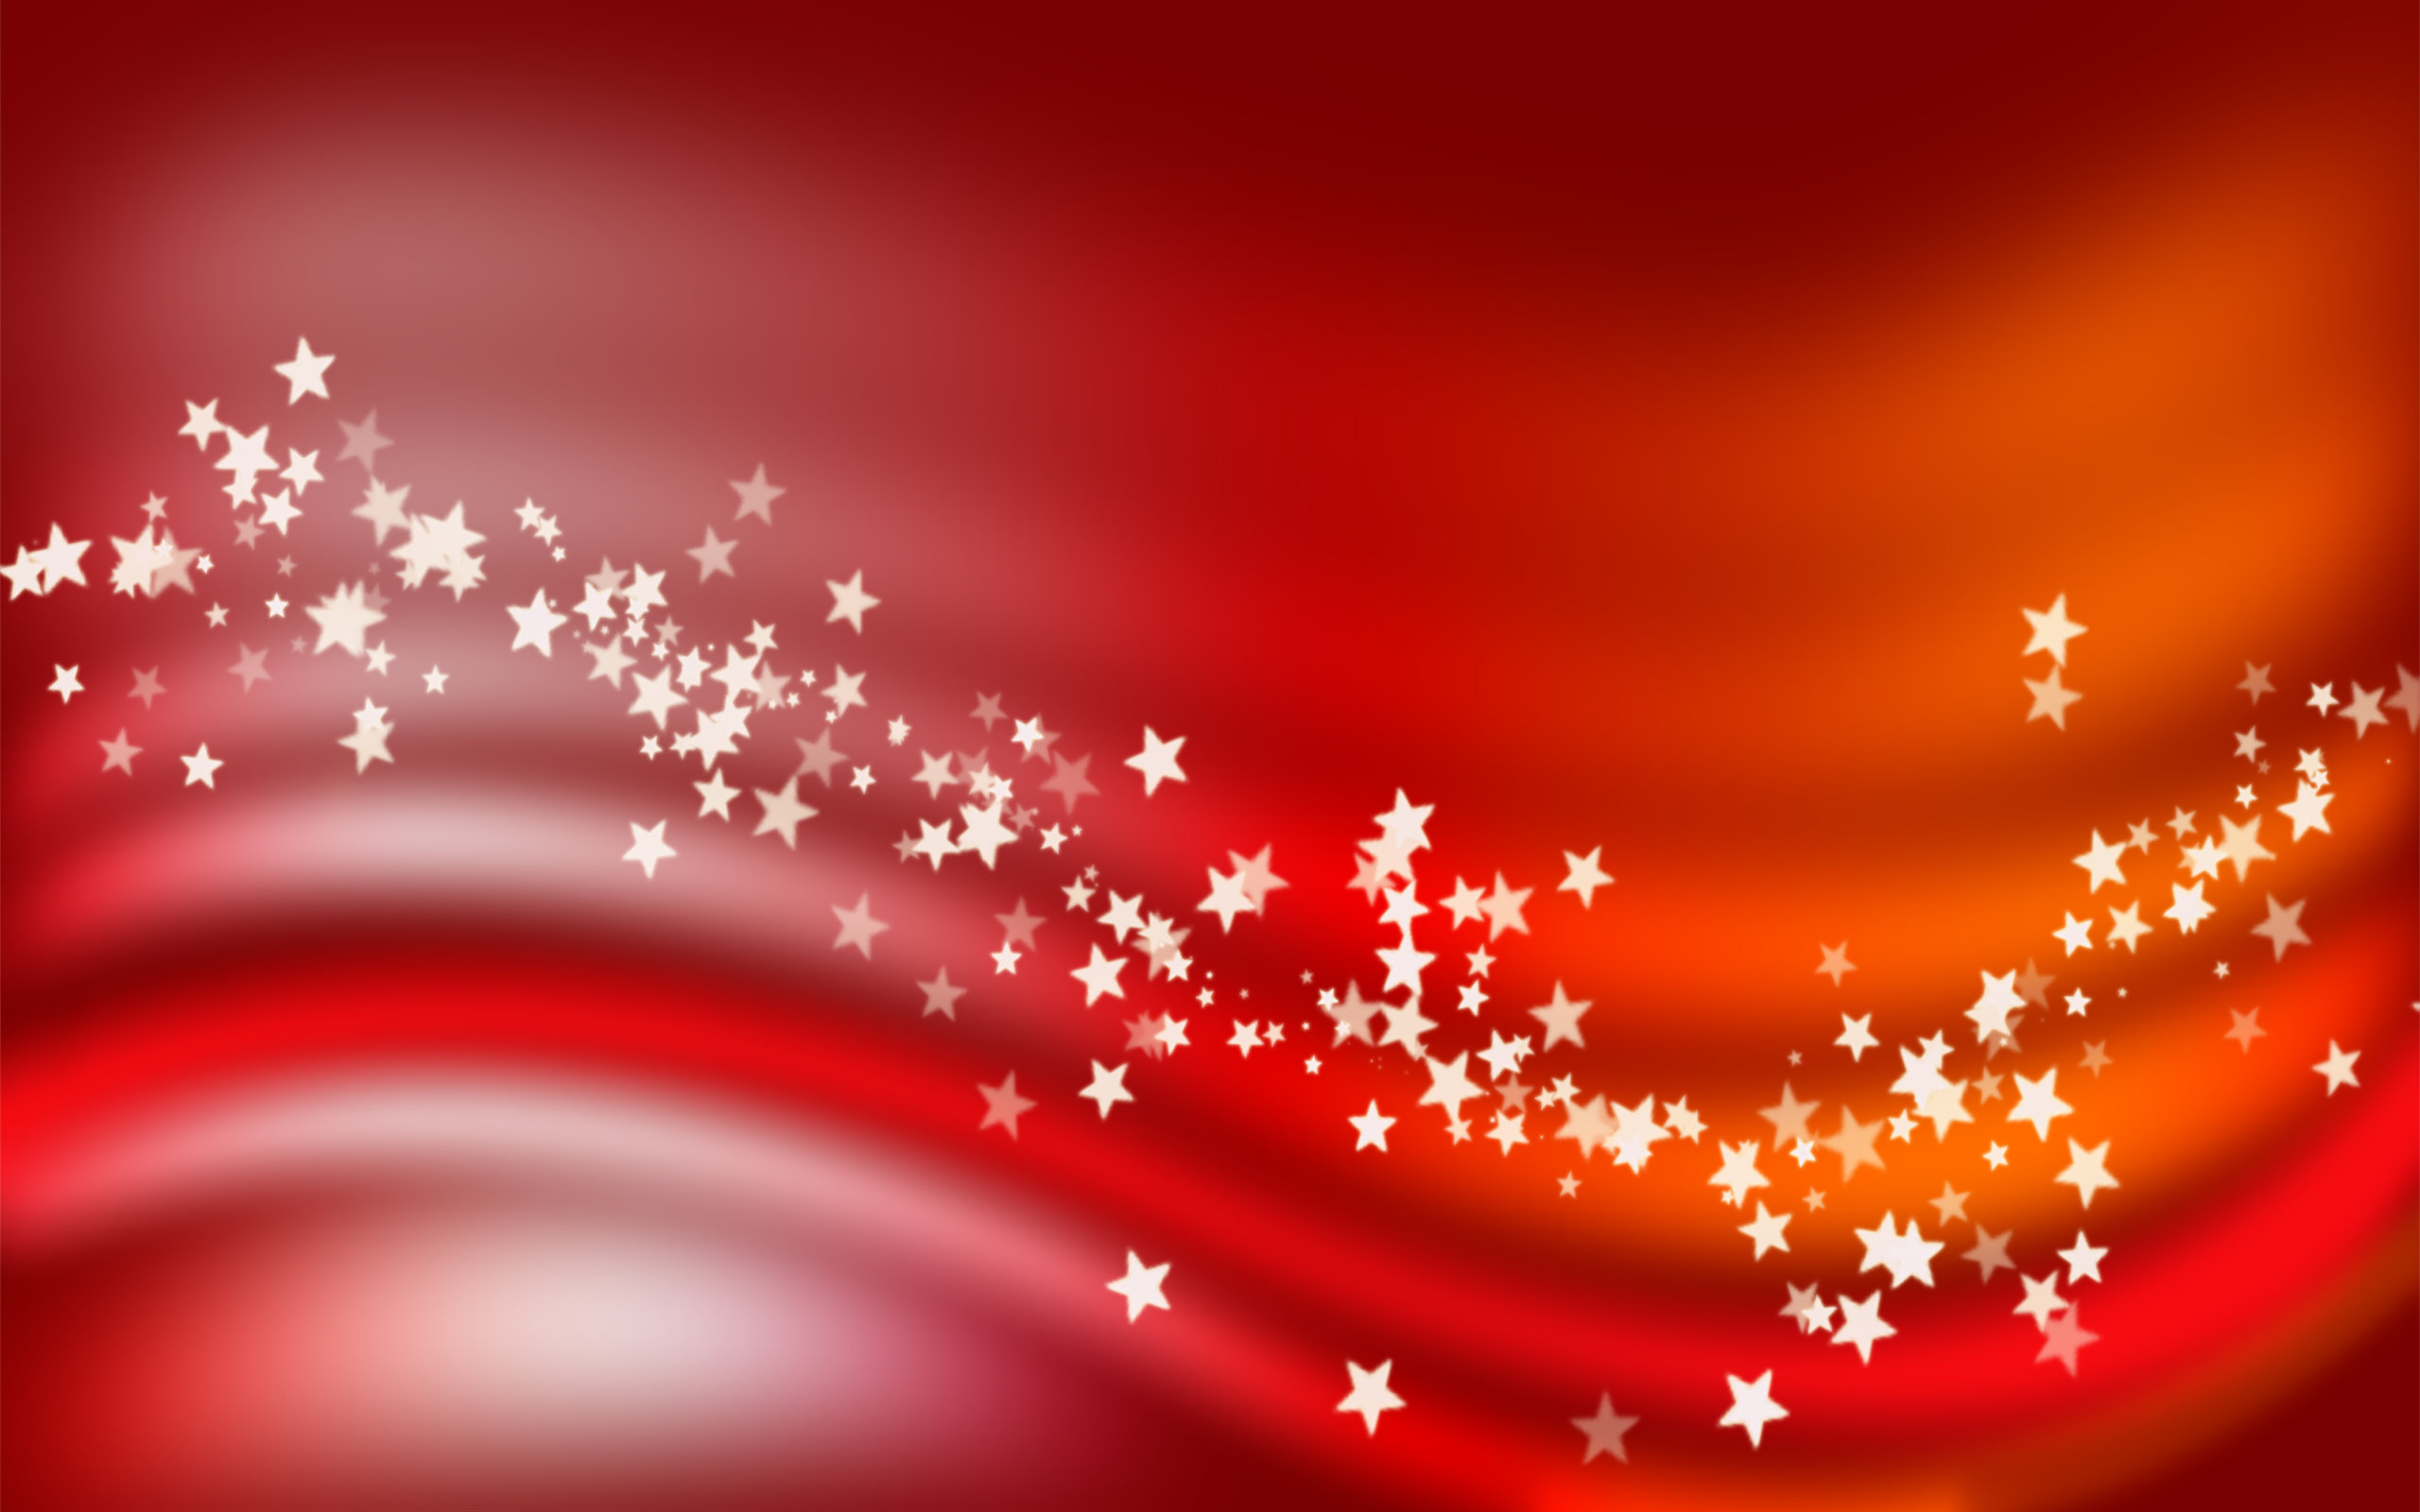 Stars - Christmas Background Hd Red - 2560x1600 Wallpaper 